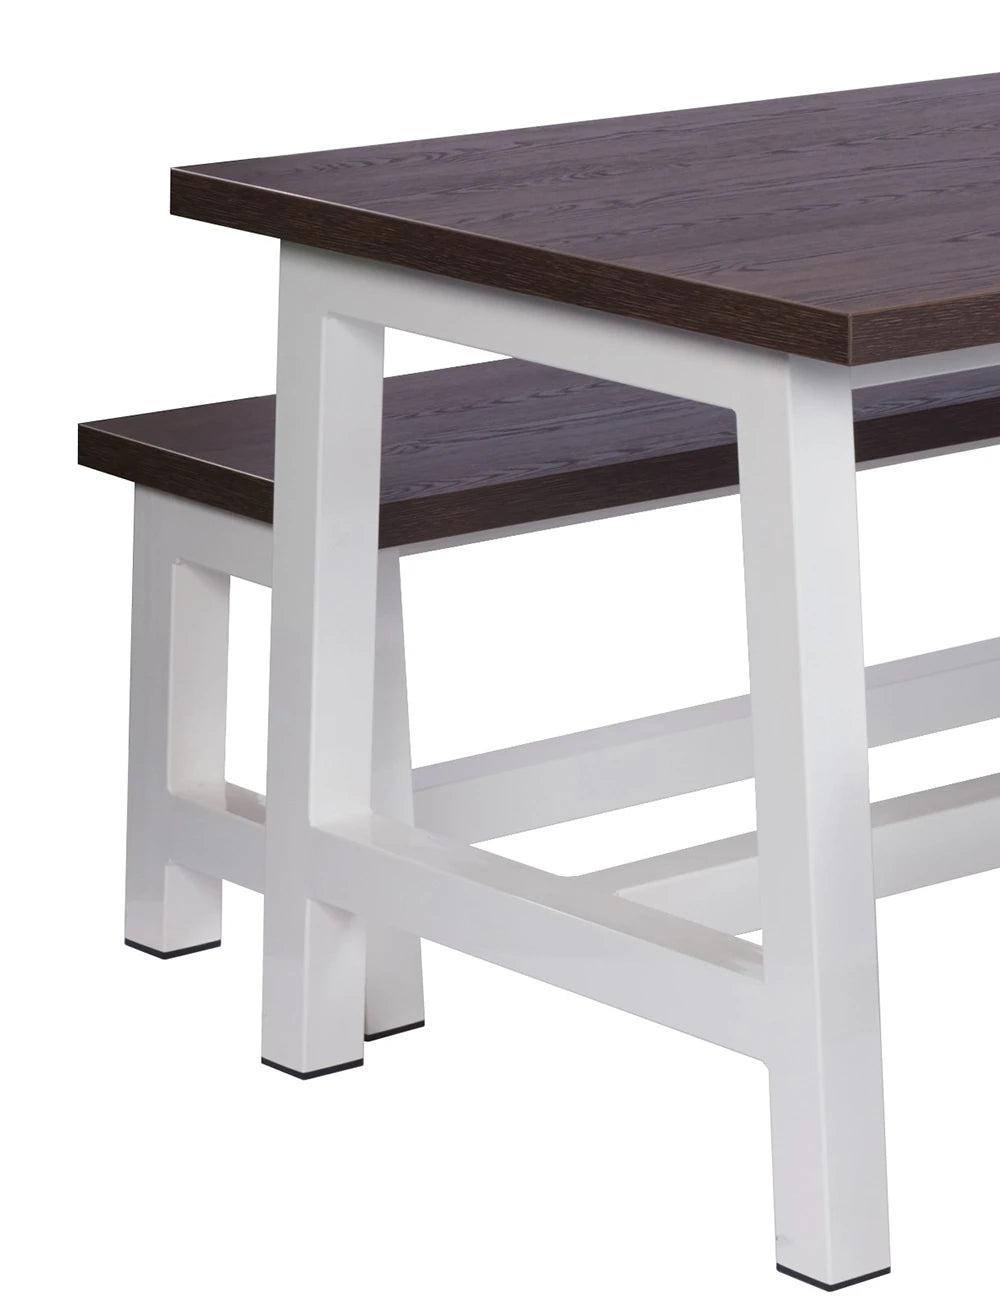 Apex Modern Wooden Table 3